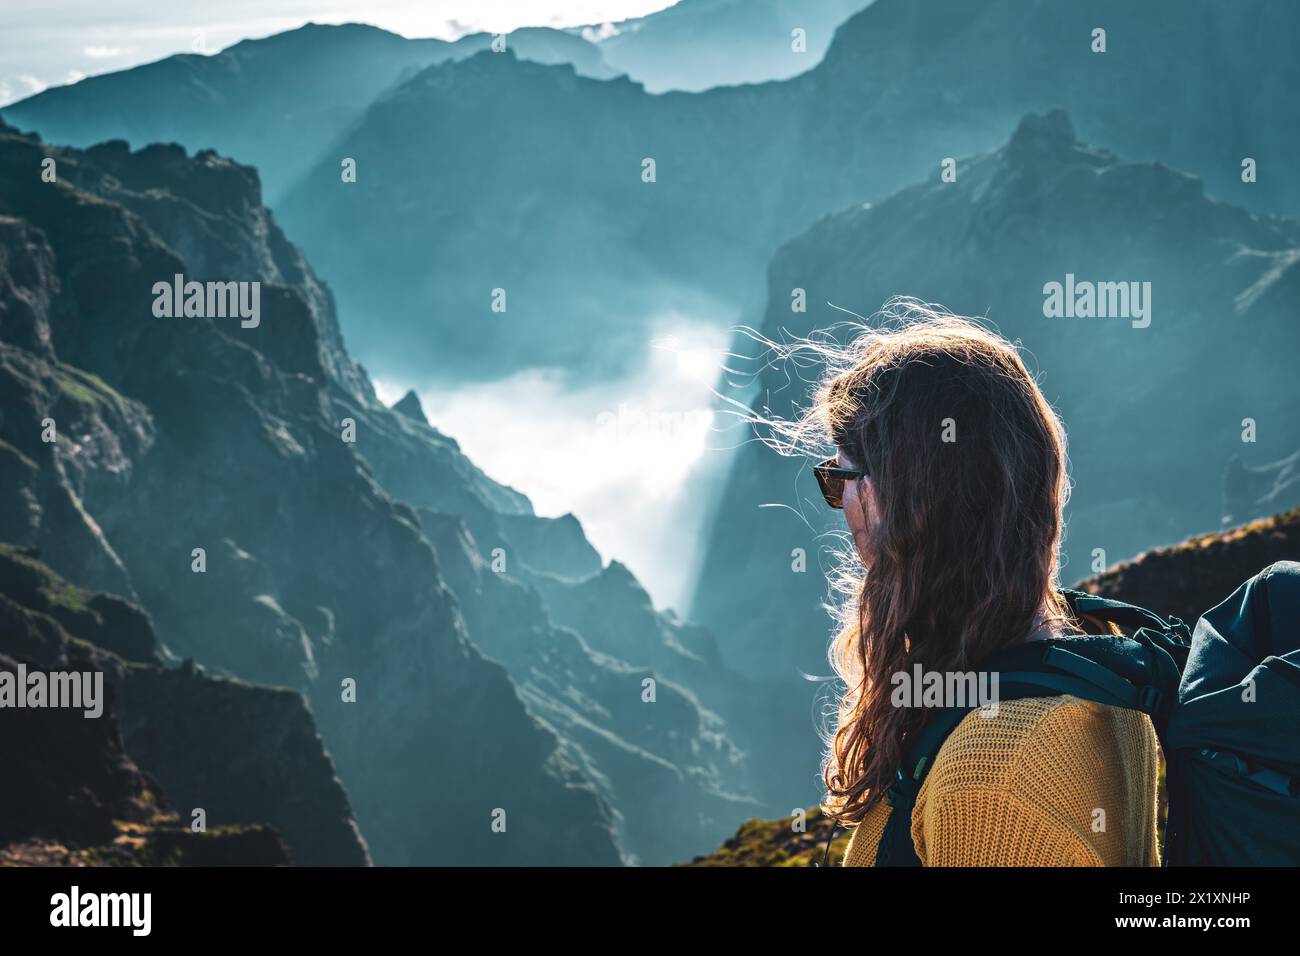 Description: Portrait of a female backpacker looking down into a deep, cloud-covered valley and enjoying the breathtaking view of the volcanic mountai Stock Photo